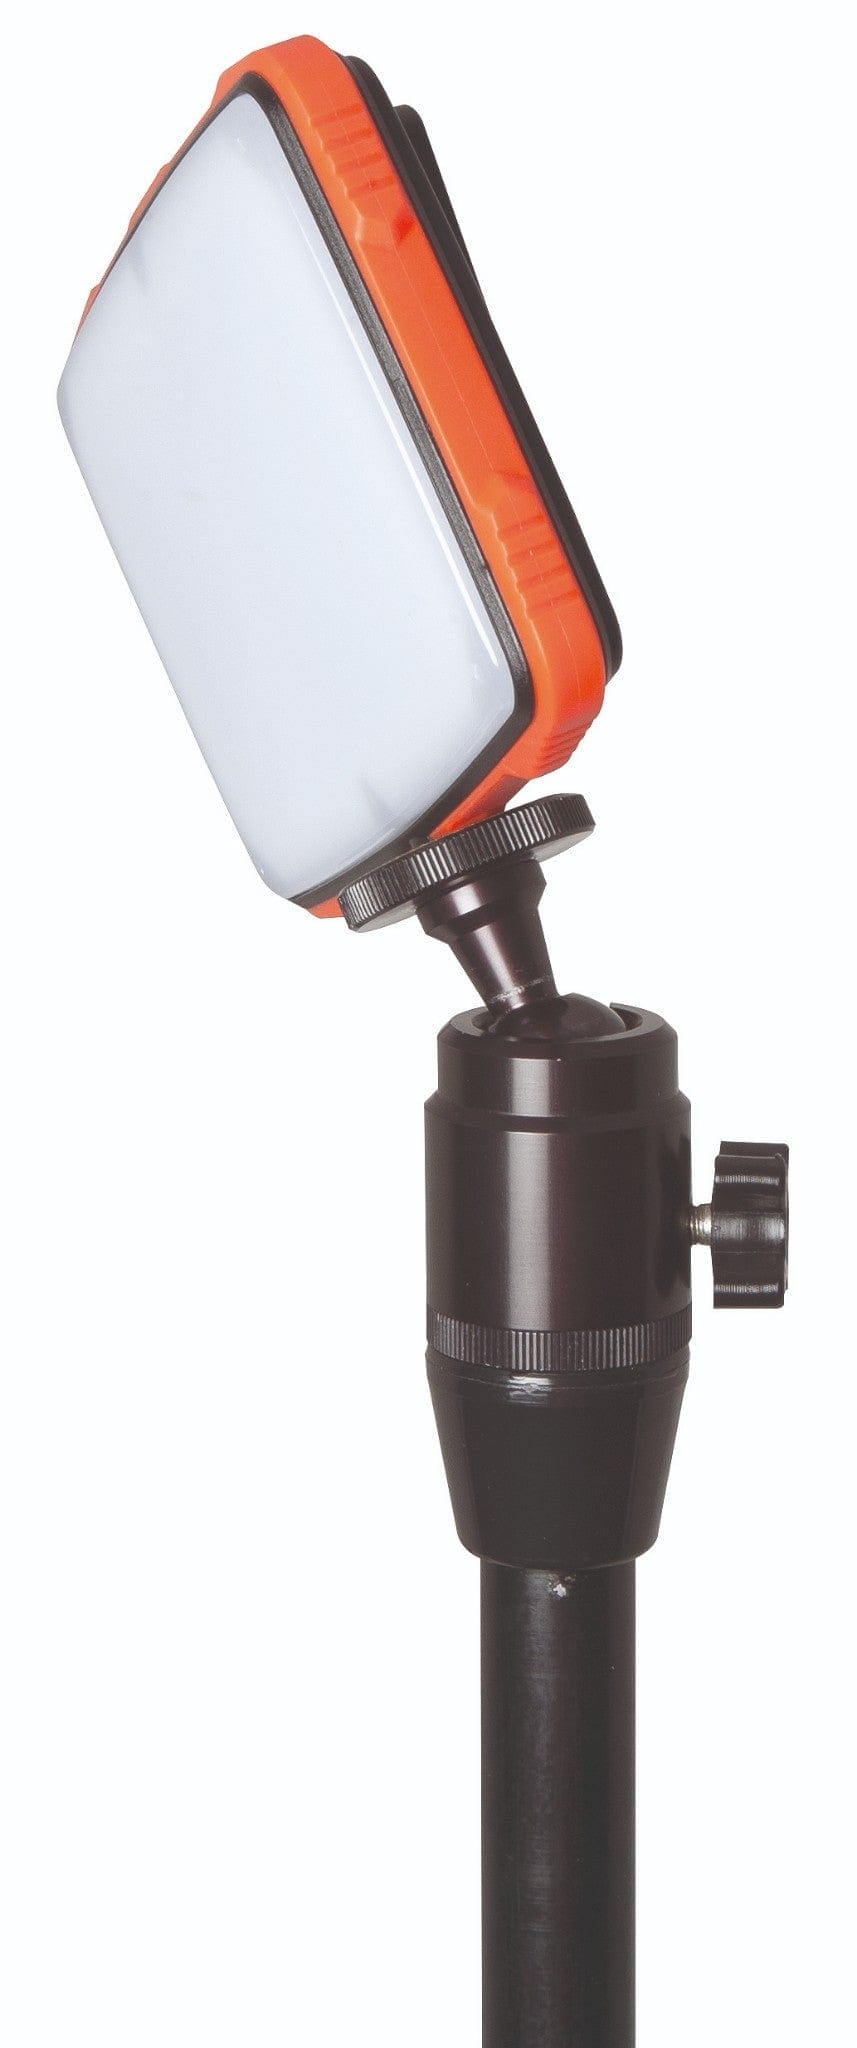 Fox Halo Photography Light - 1100 Lumens - Rechargeable Battery.